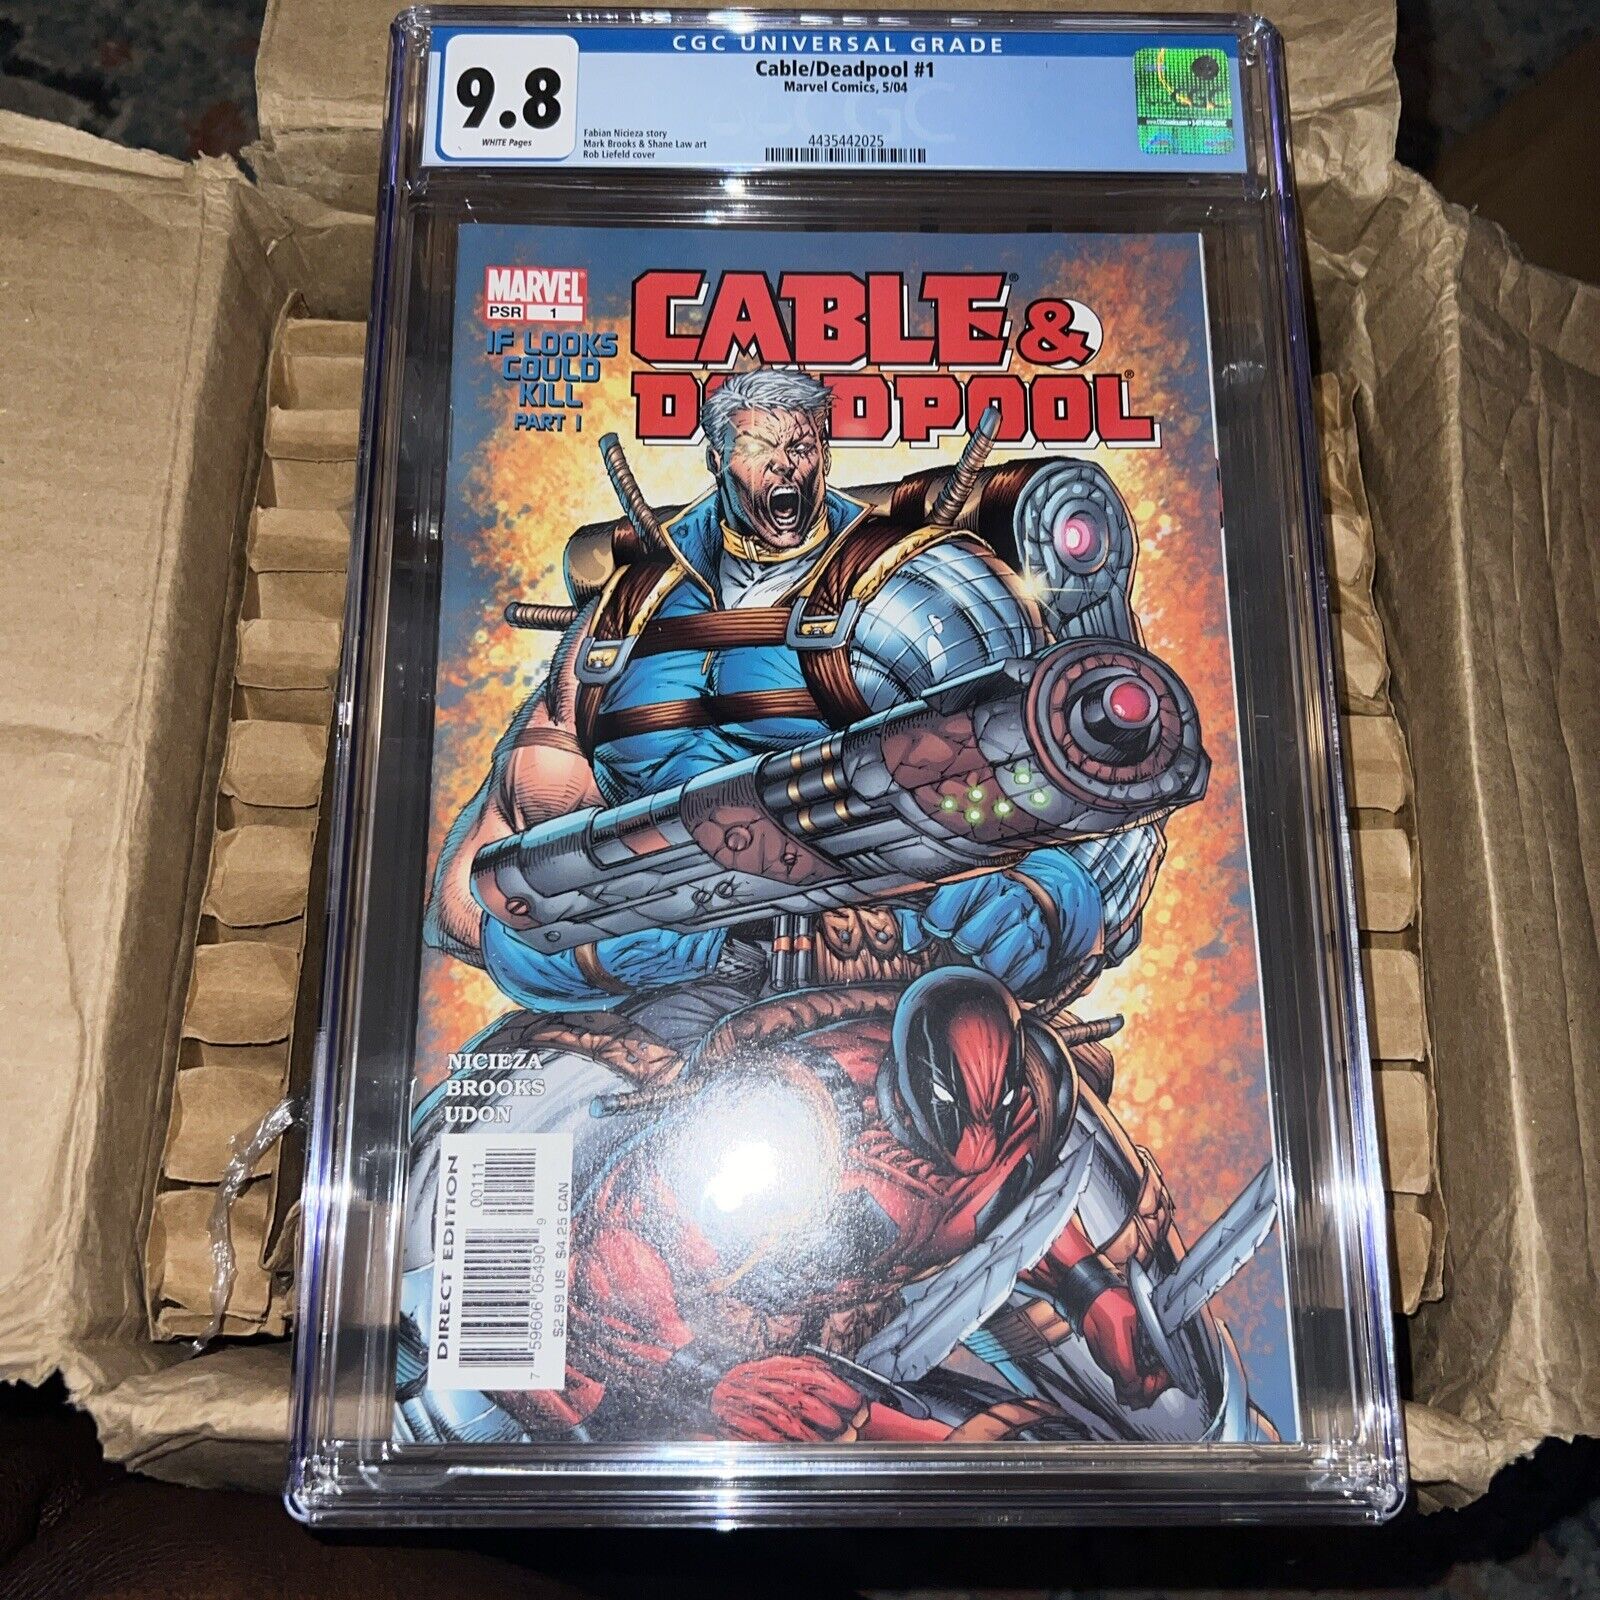 MARVEL COMICS 2004 CABLE & DEADPOOL DEBUT ISSUE 1 GRADED CGC 9.8 BEST PRICE